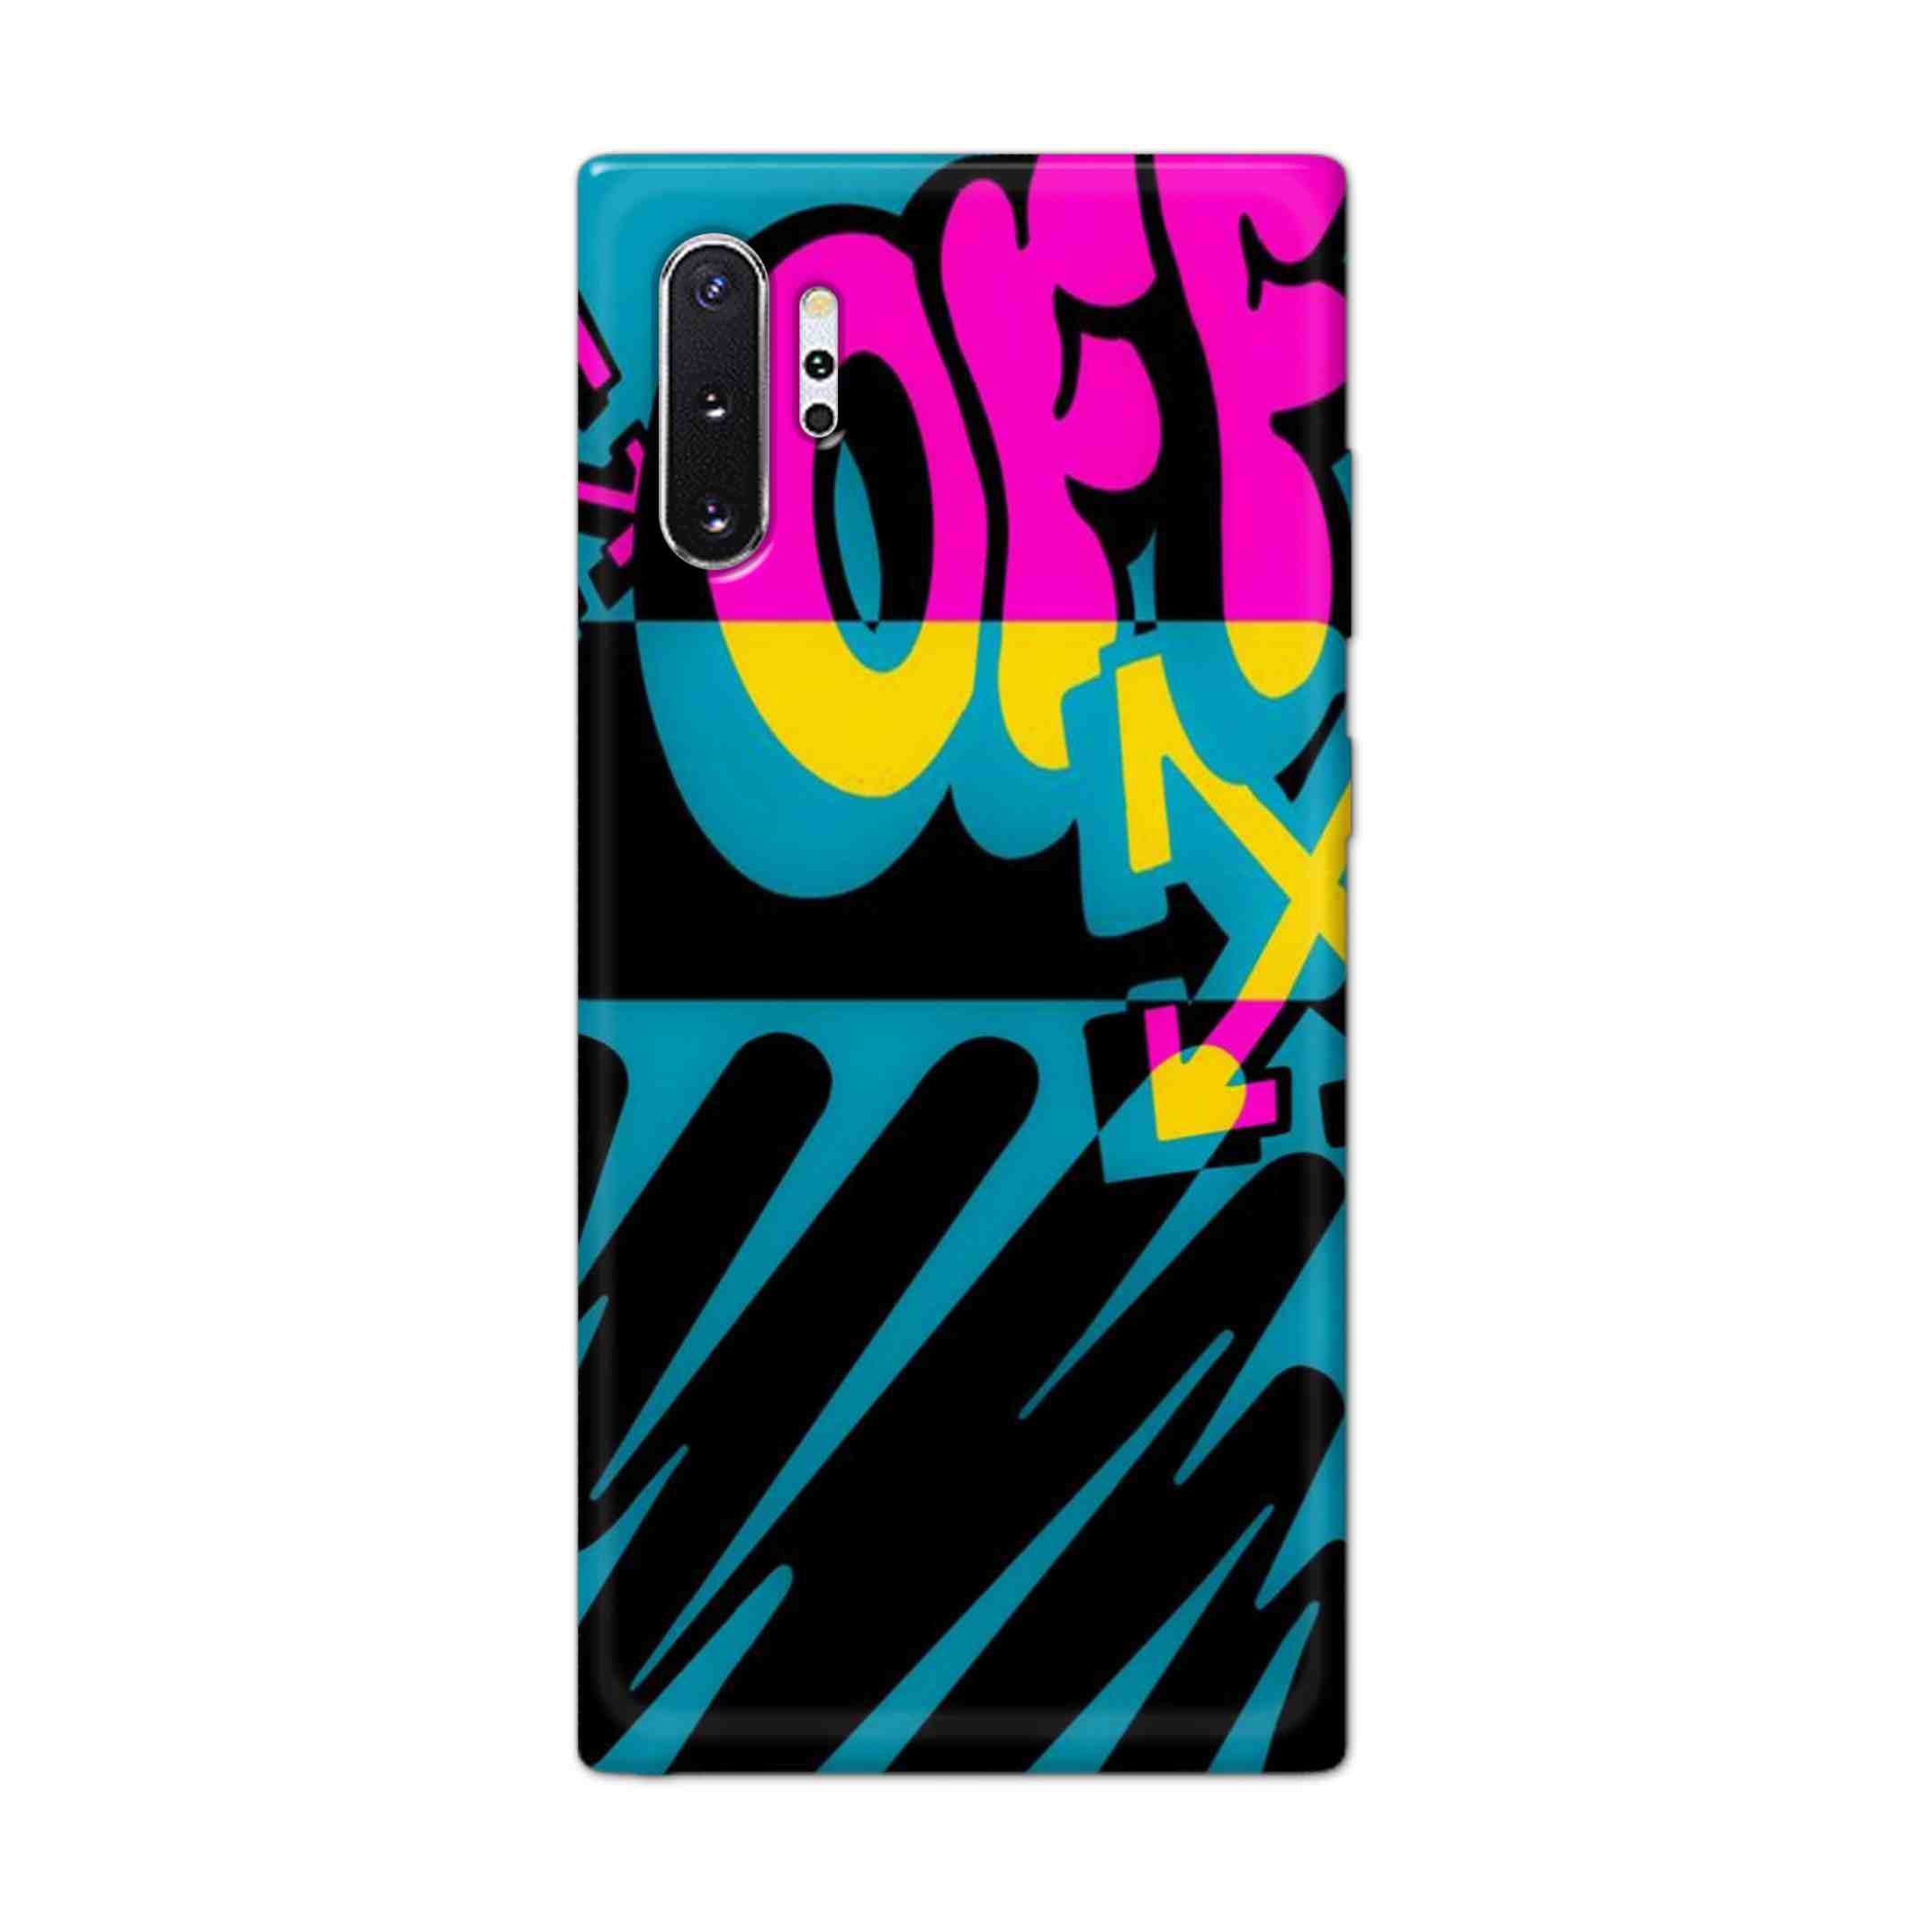 Buy Off Hard Back Mobile Phone Case Cover For Samsung Note 10 Plus (5G) Online